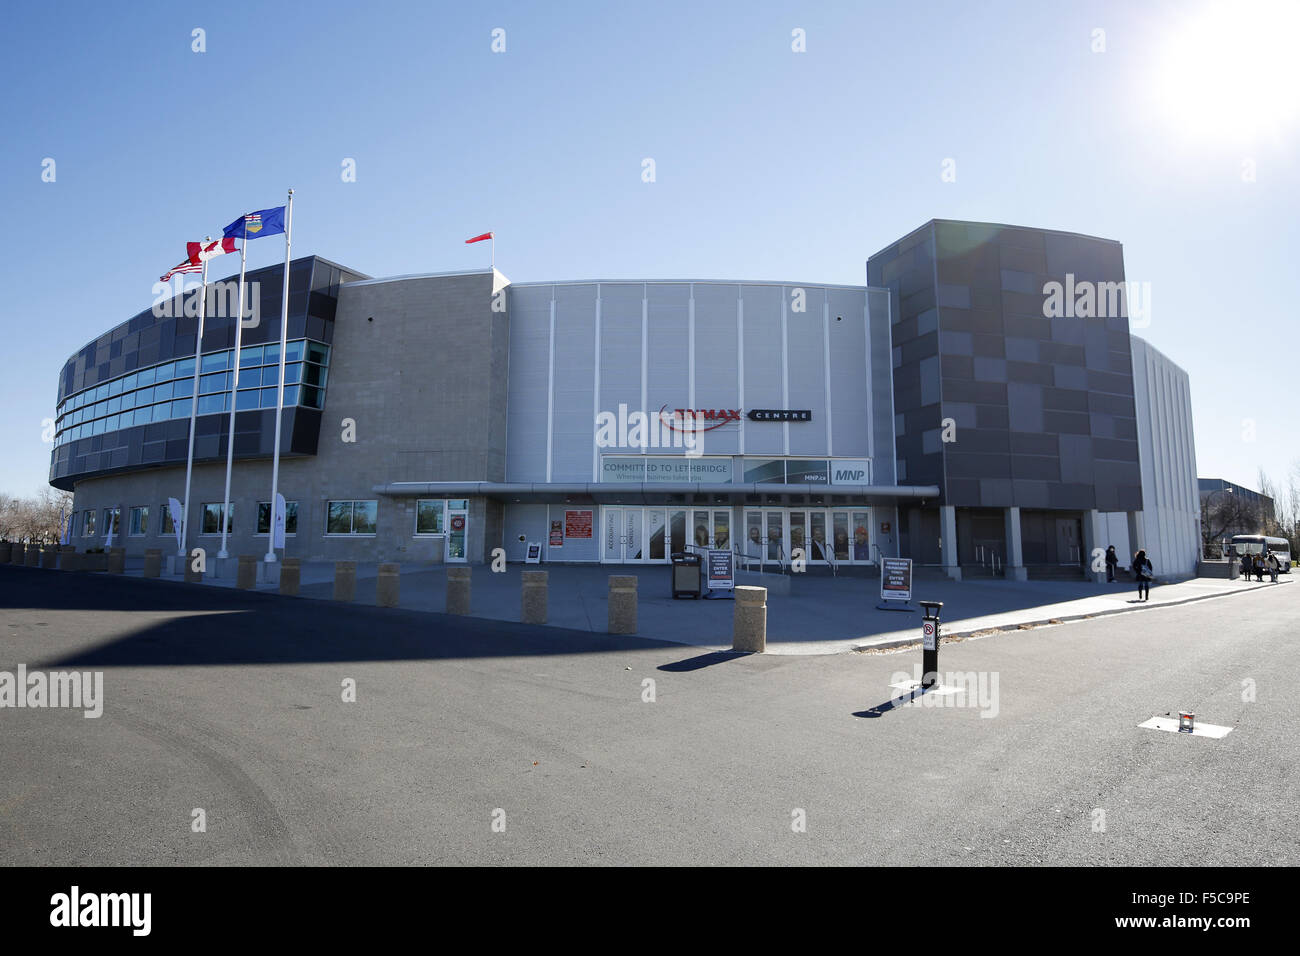 ENMAX Centrium - All You Need to Know BEFORE You Go (with Photos)